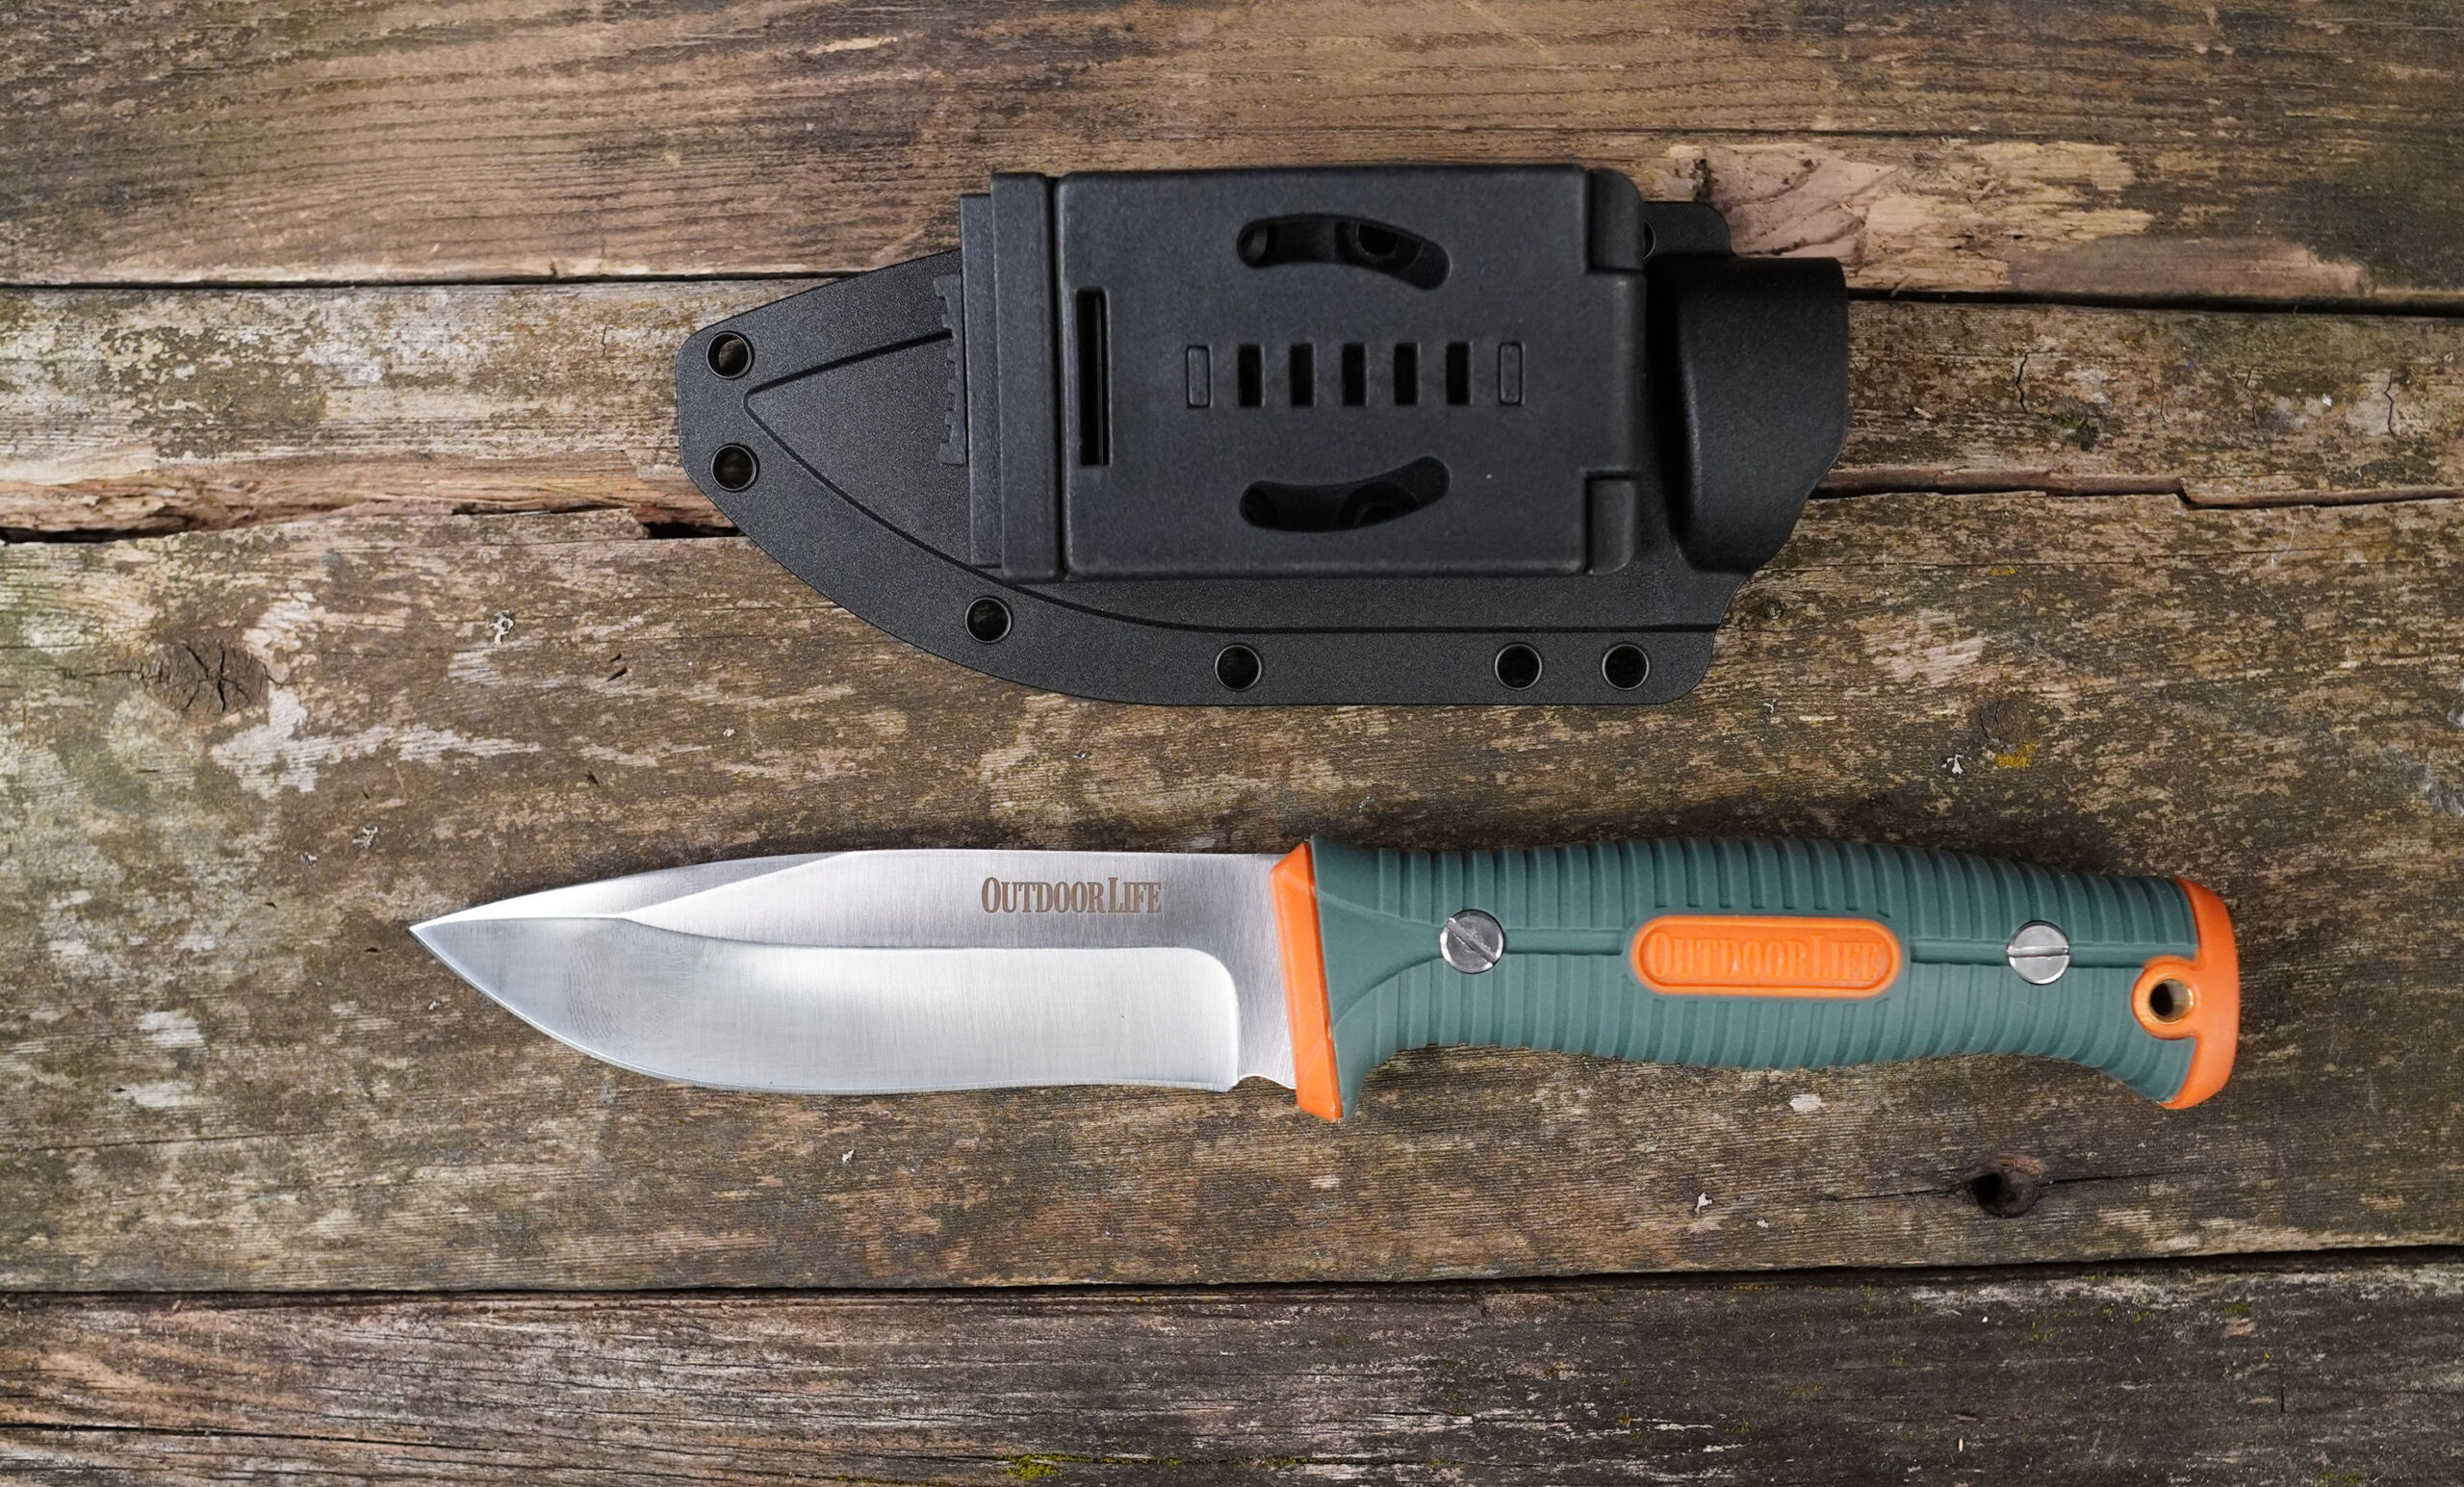 Arm yourself with the 14 best hunting knives available - The Manual